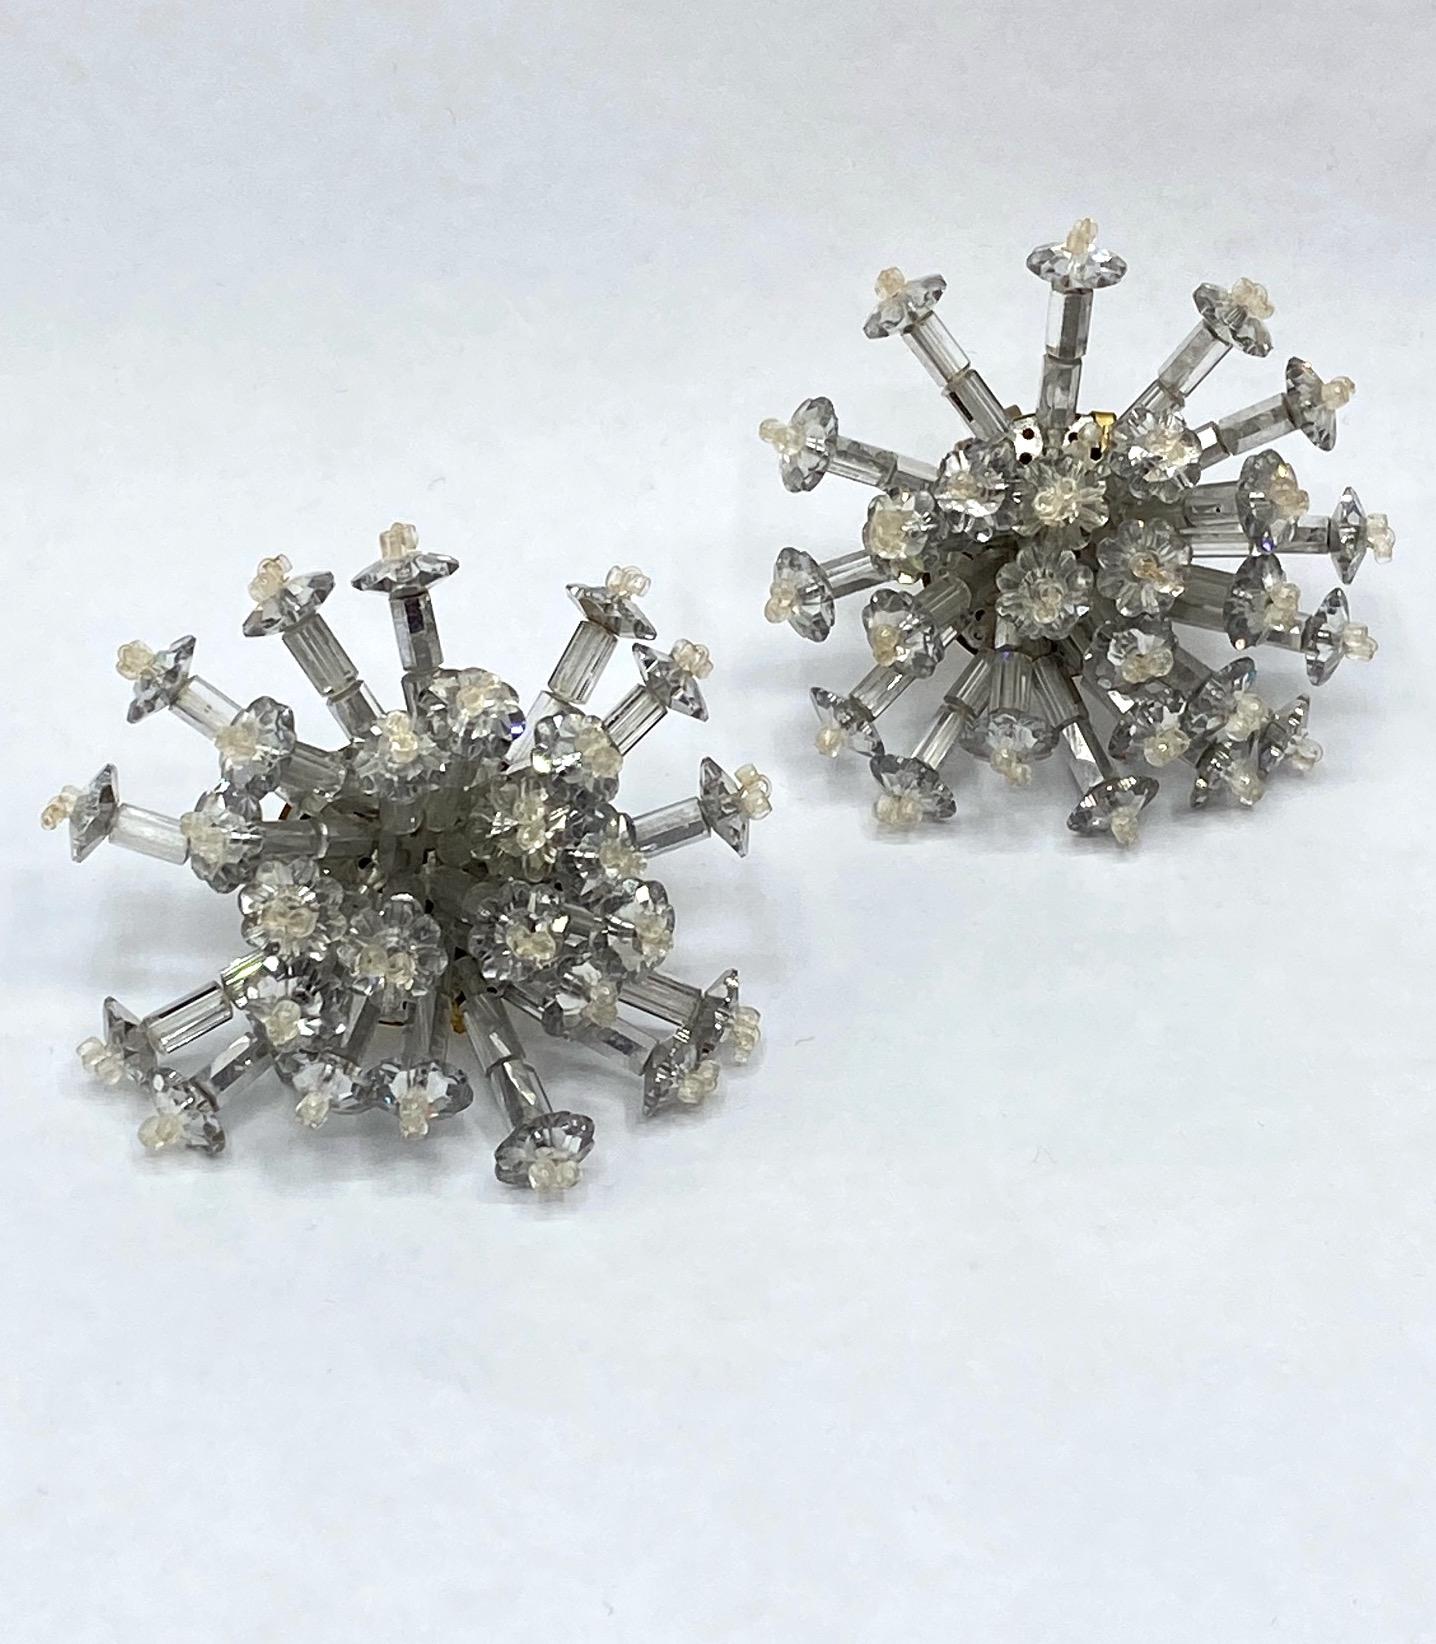 A dramatic large pair of 1950s Starburst or sputnik style earrings by famous brother and sister Italian design team Coppola e Toppo. Each dome shape earrings measures about 2